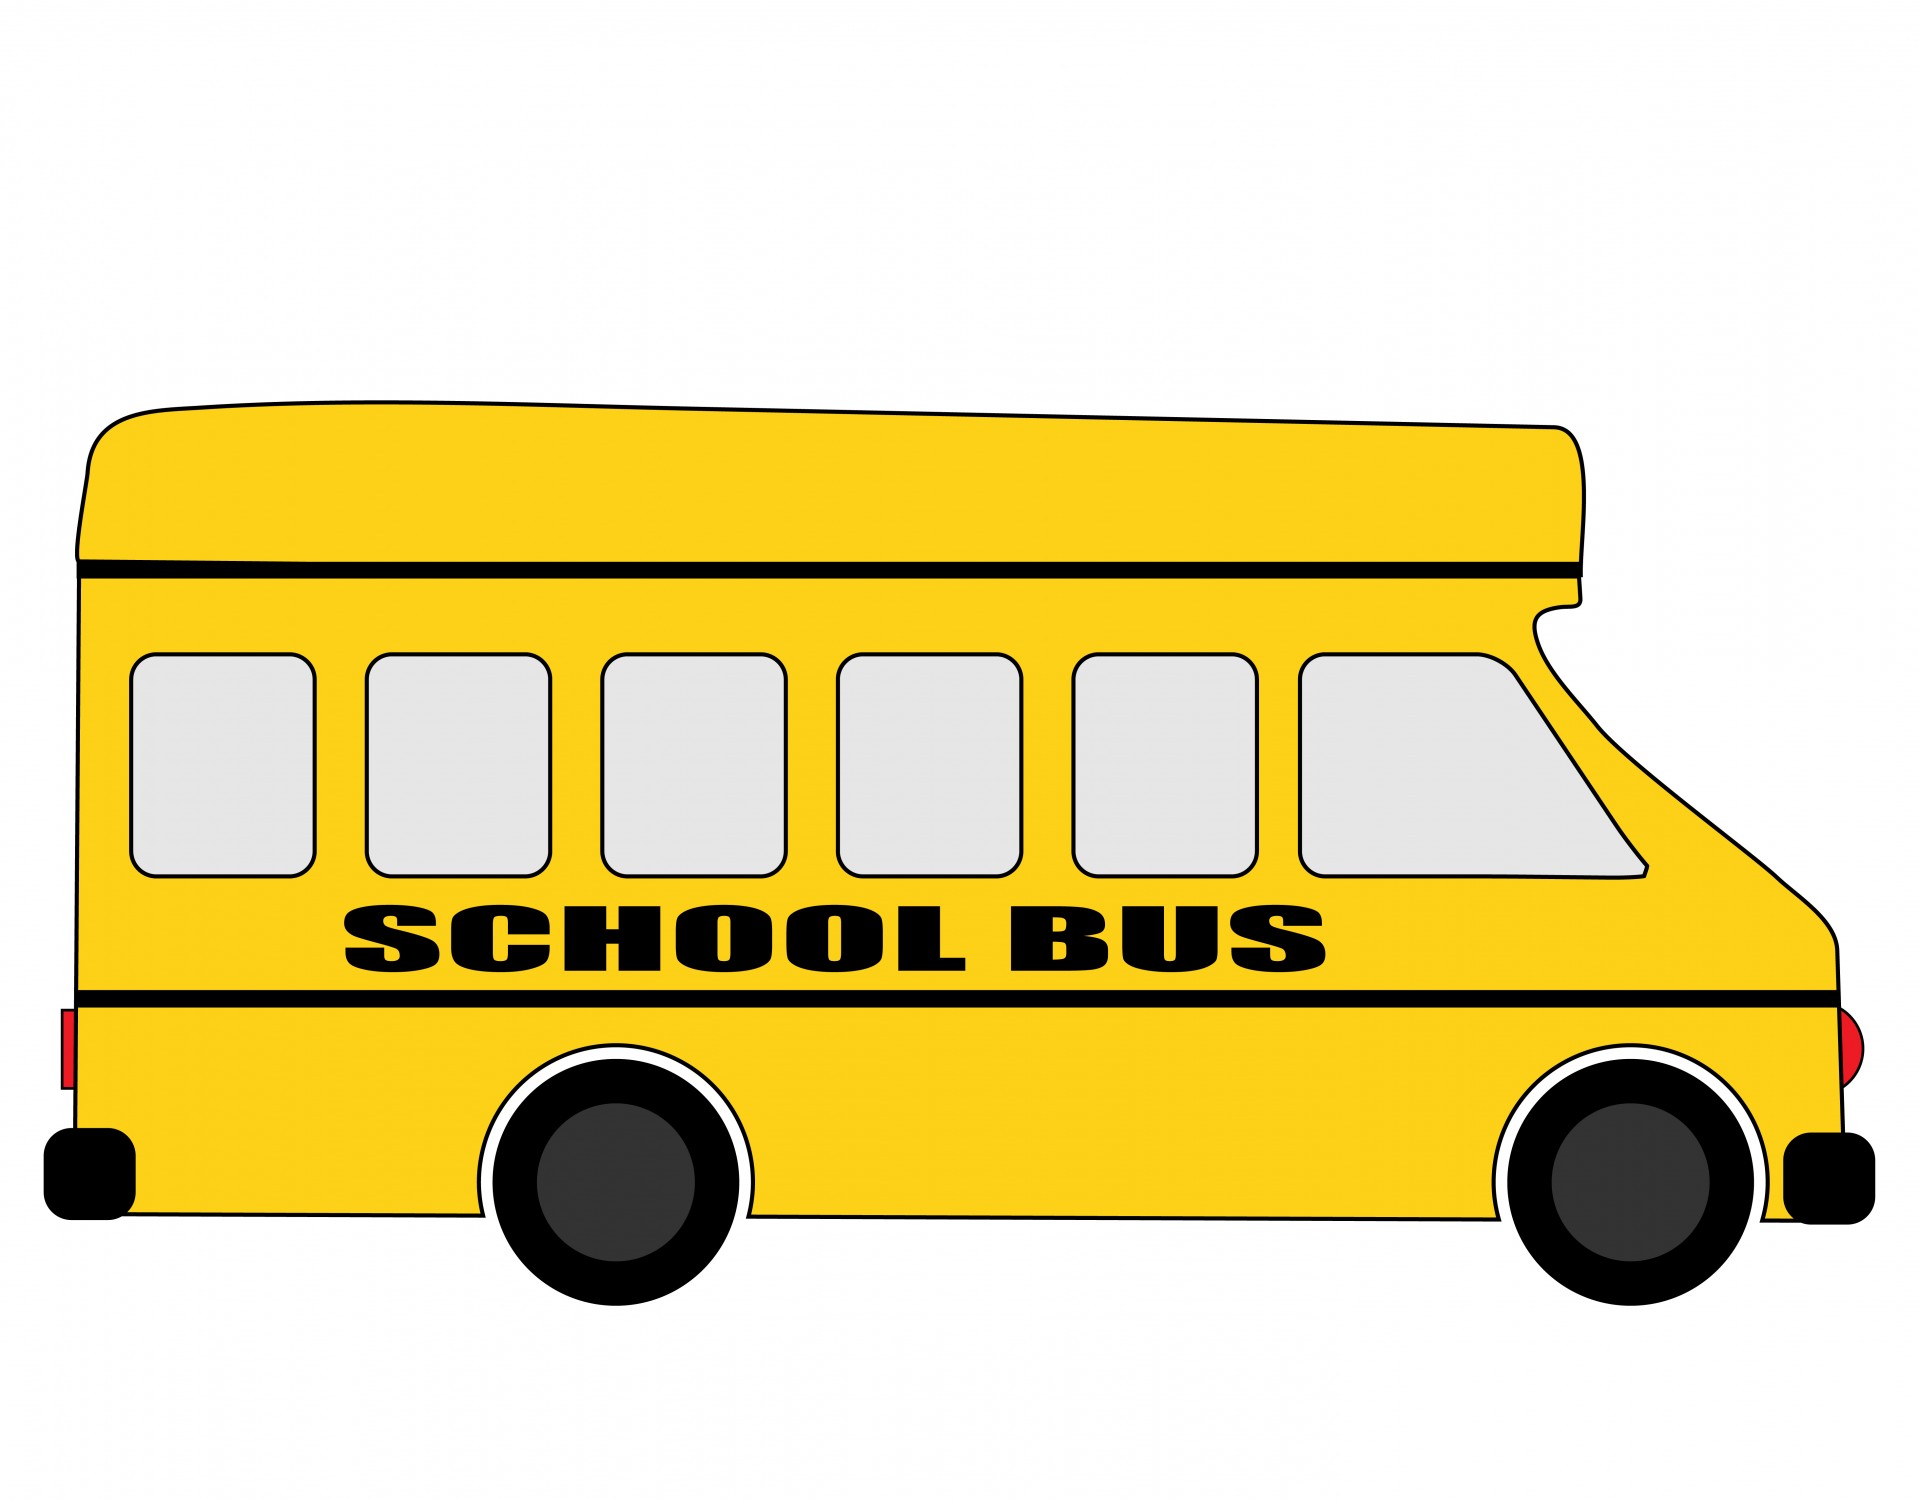 School bus  black and white school bus side view clipart black and white clipartfest 7